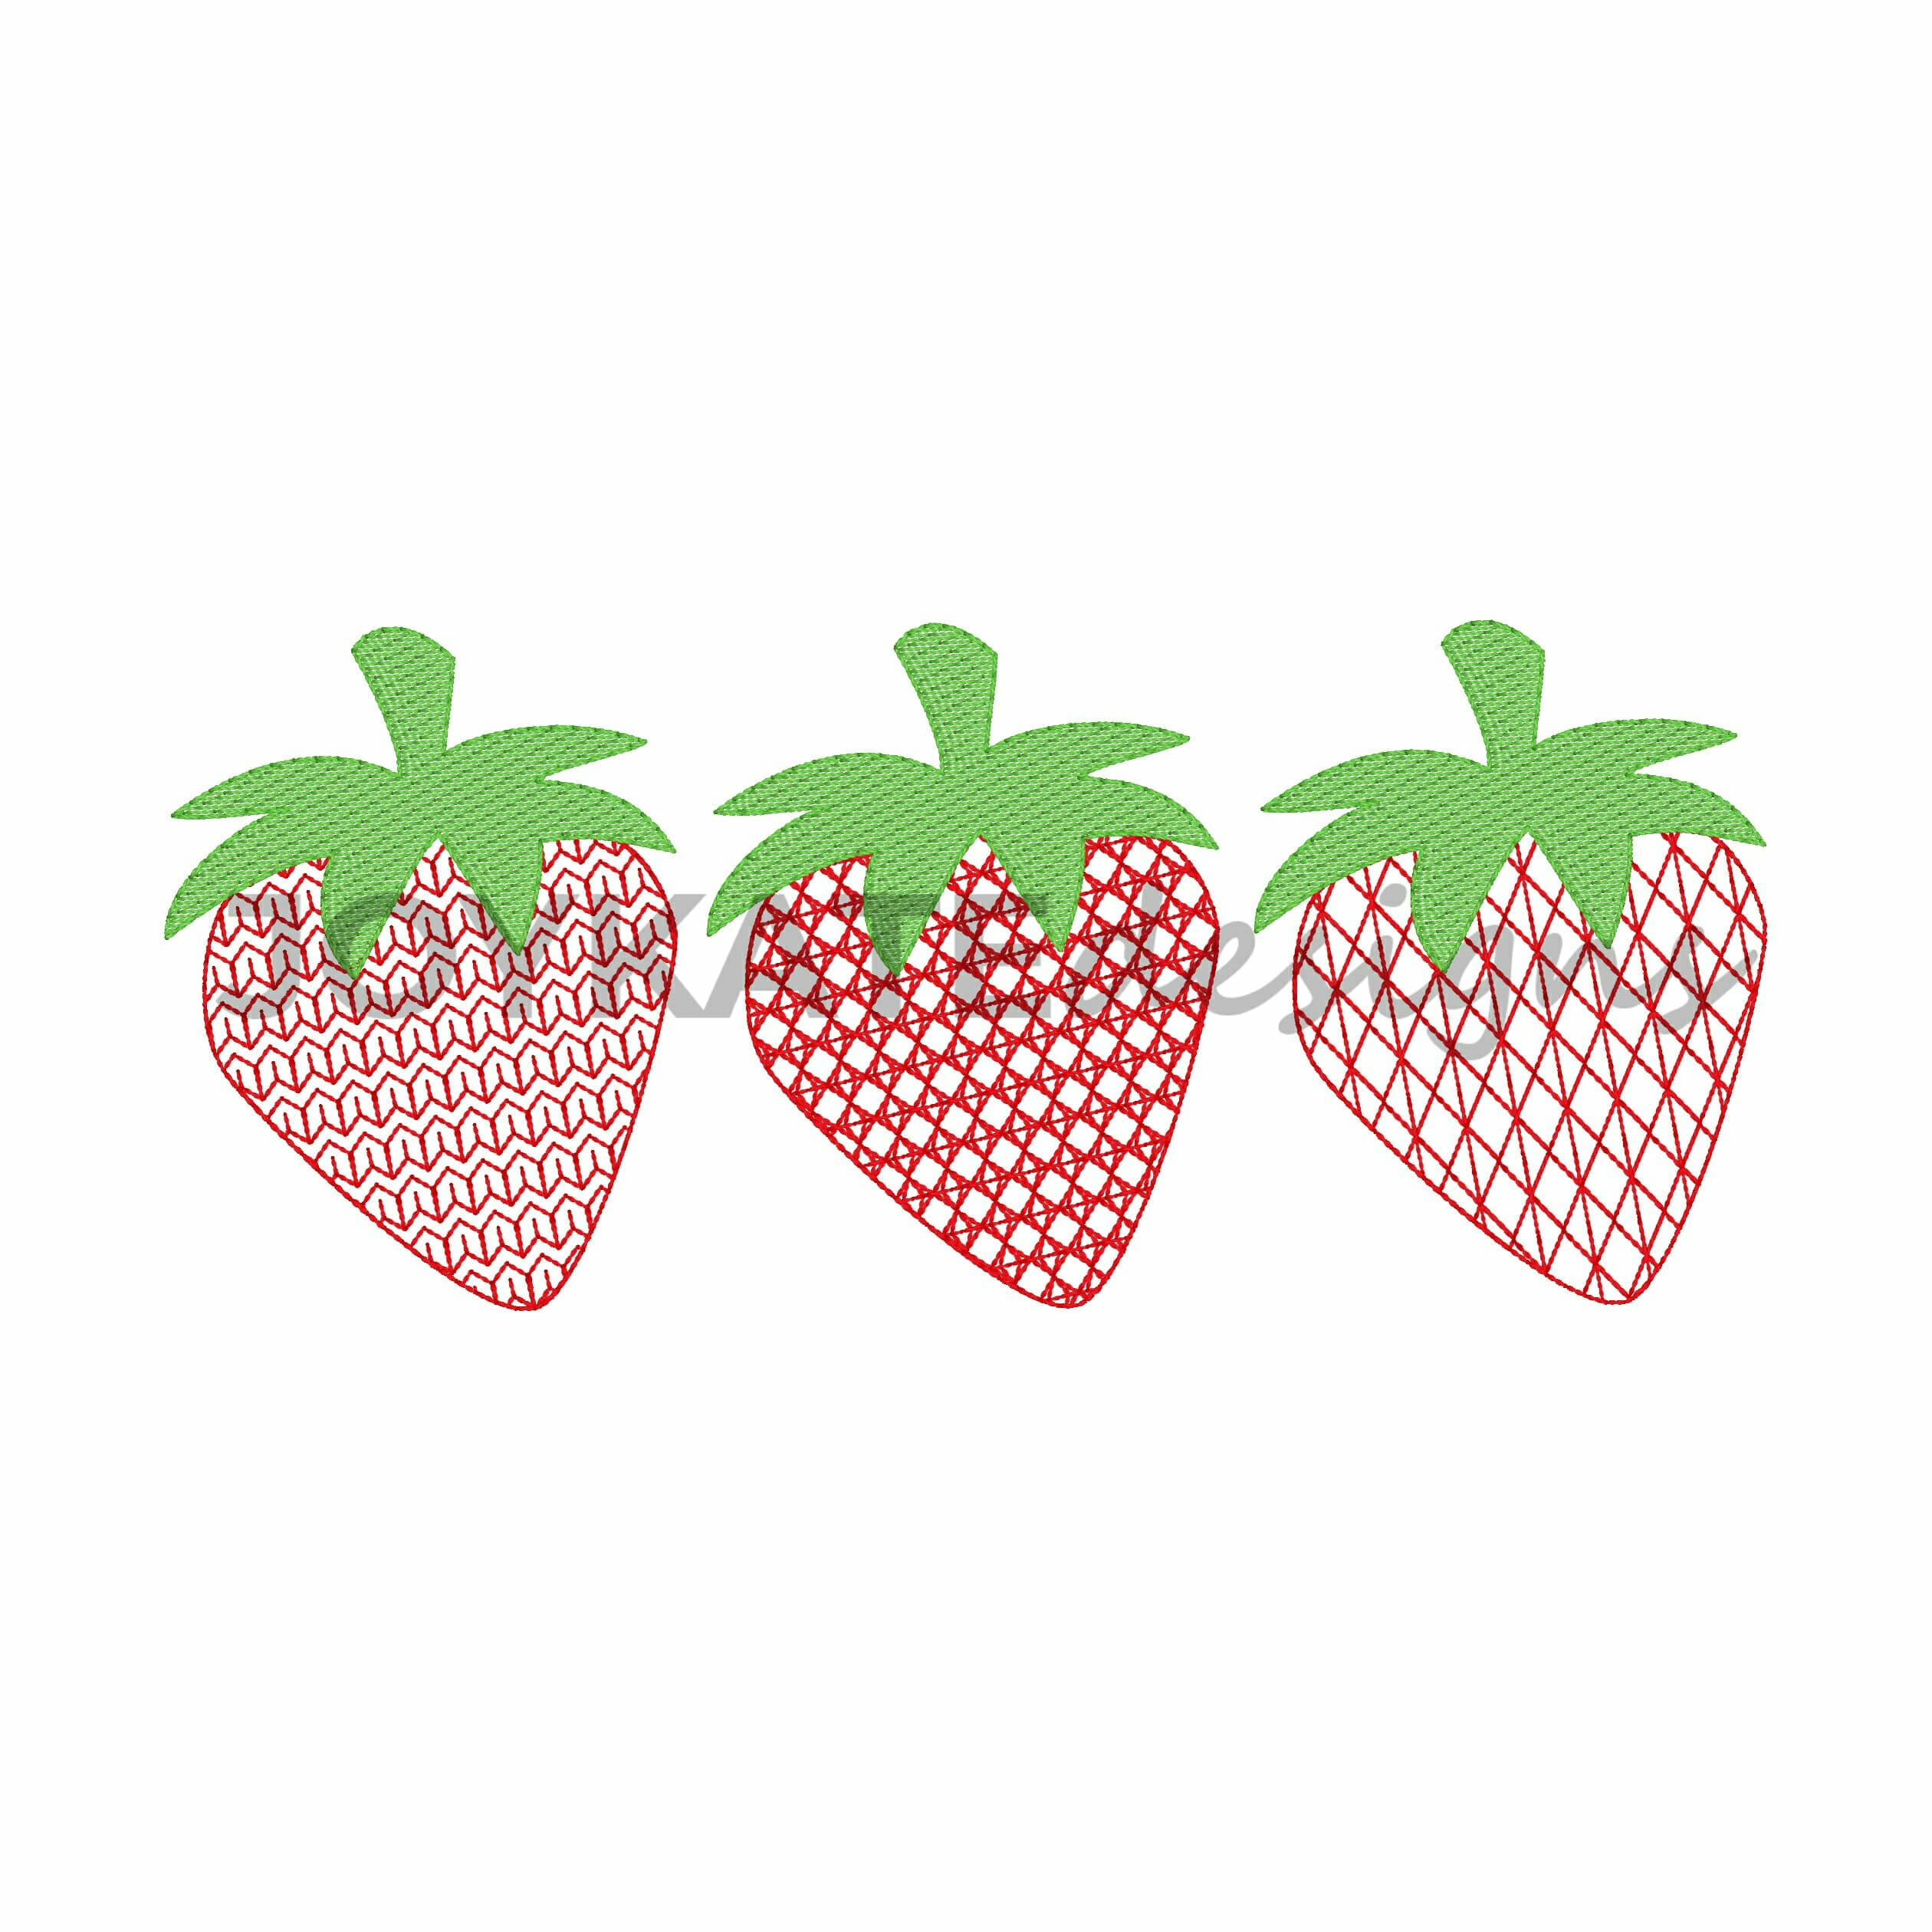 Strawberry Embroidery Pattern Strawberry Trio Filled Stitch Embroidery Design